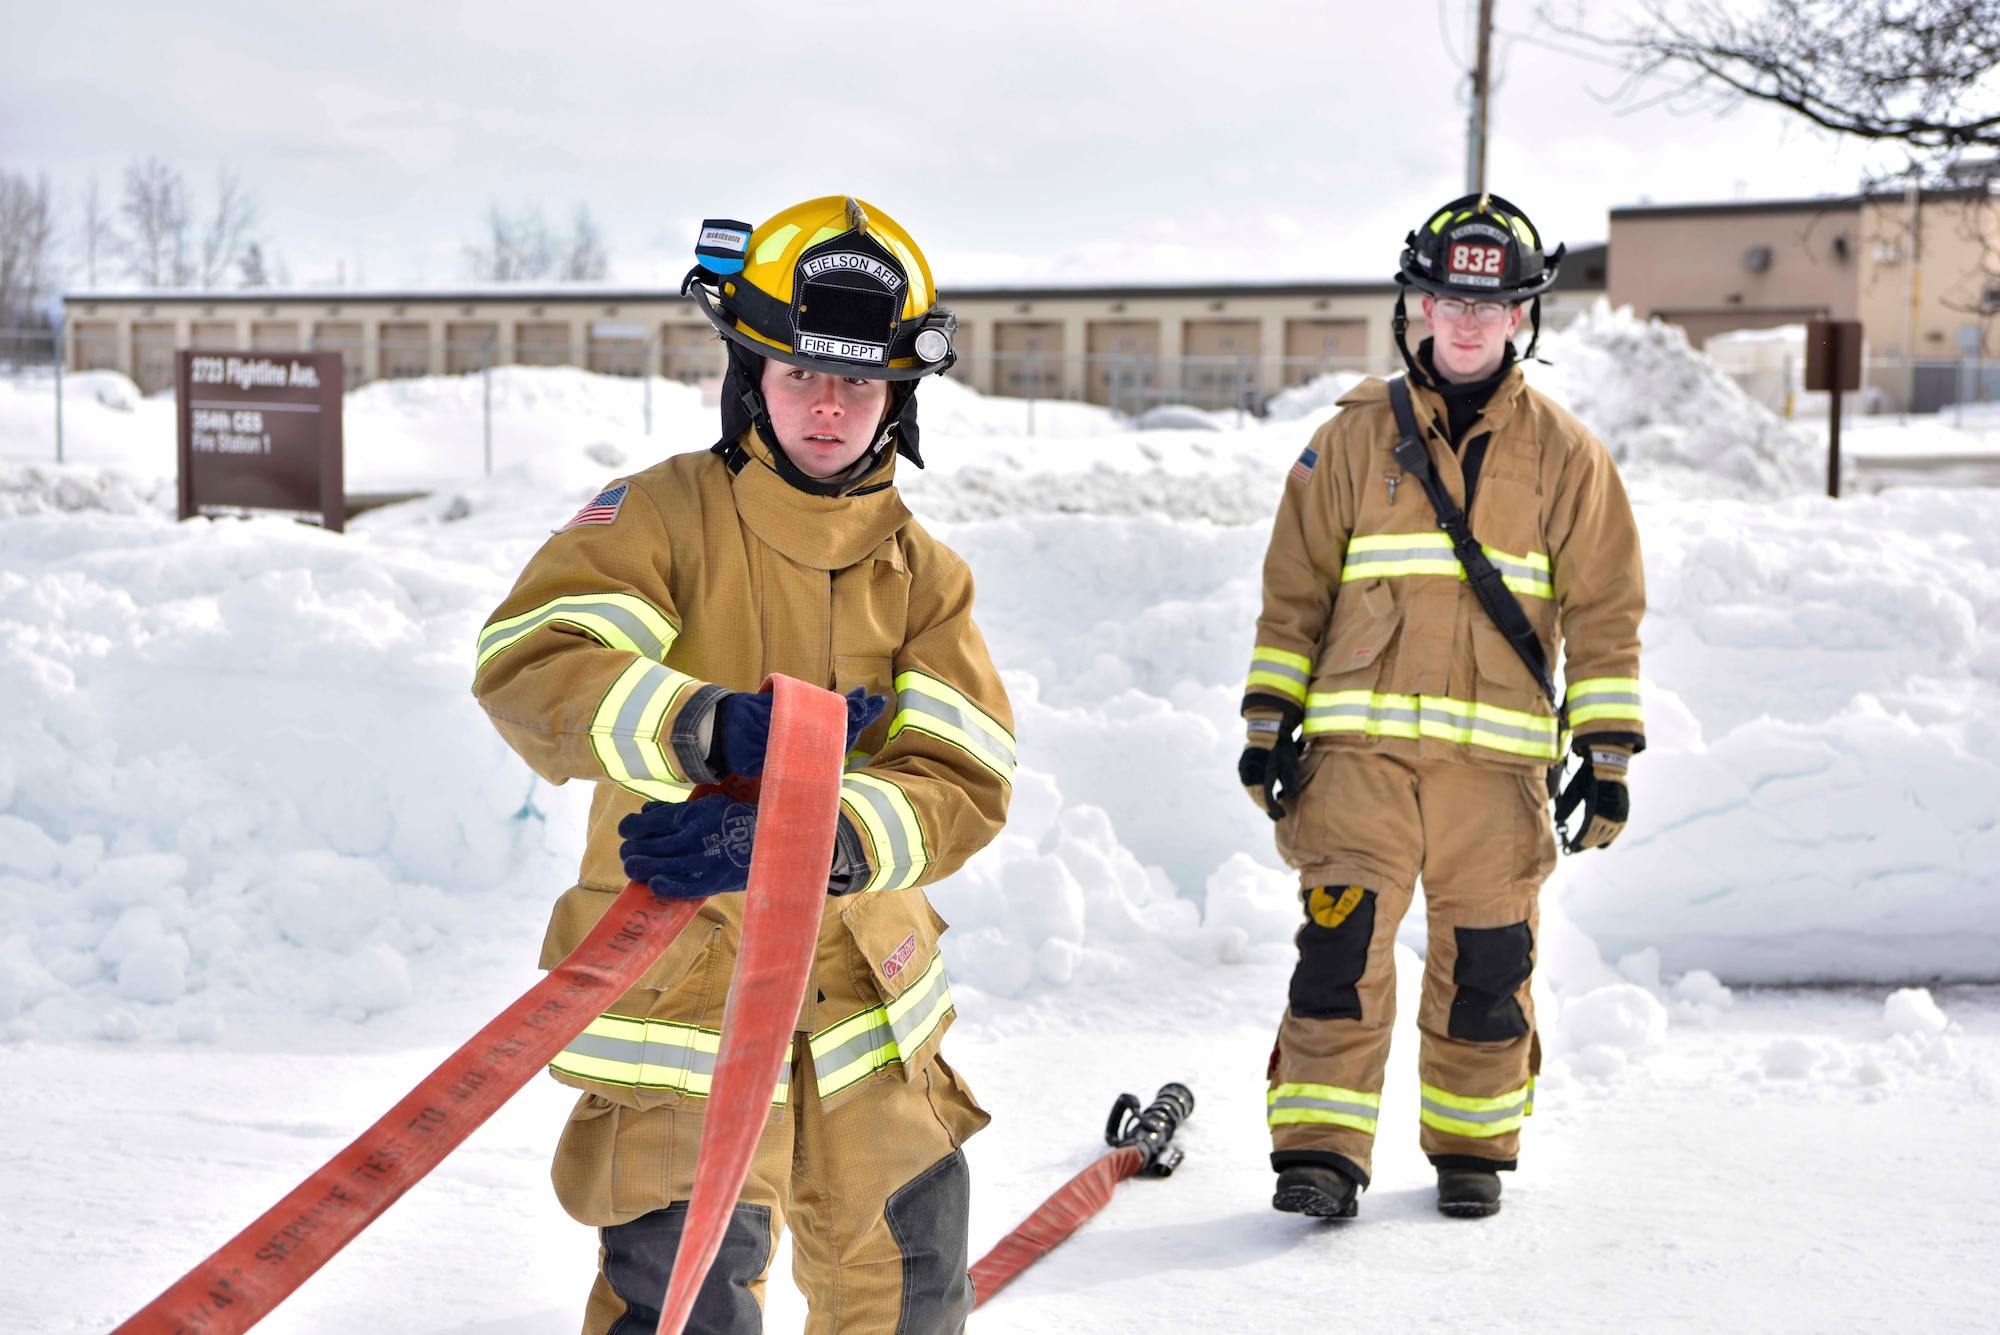 Airman Lily Lane, a 354th Civil Engineer Squadron firefighter, pulls a hose from a fire truck during a training exercise on Eielson Air Force Base, Alaska, March 26, 2020. Eielson firefighters train for multiple types of situations such as cold-weather response, forest fire containment, structure and vehicle fires, as well as medical emergencies. (U.S. Air Force photo by Senior Airman Beaux Hebert)